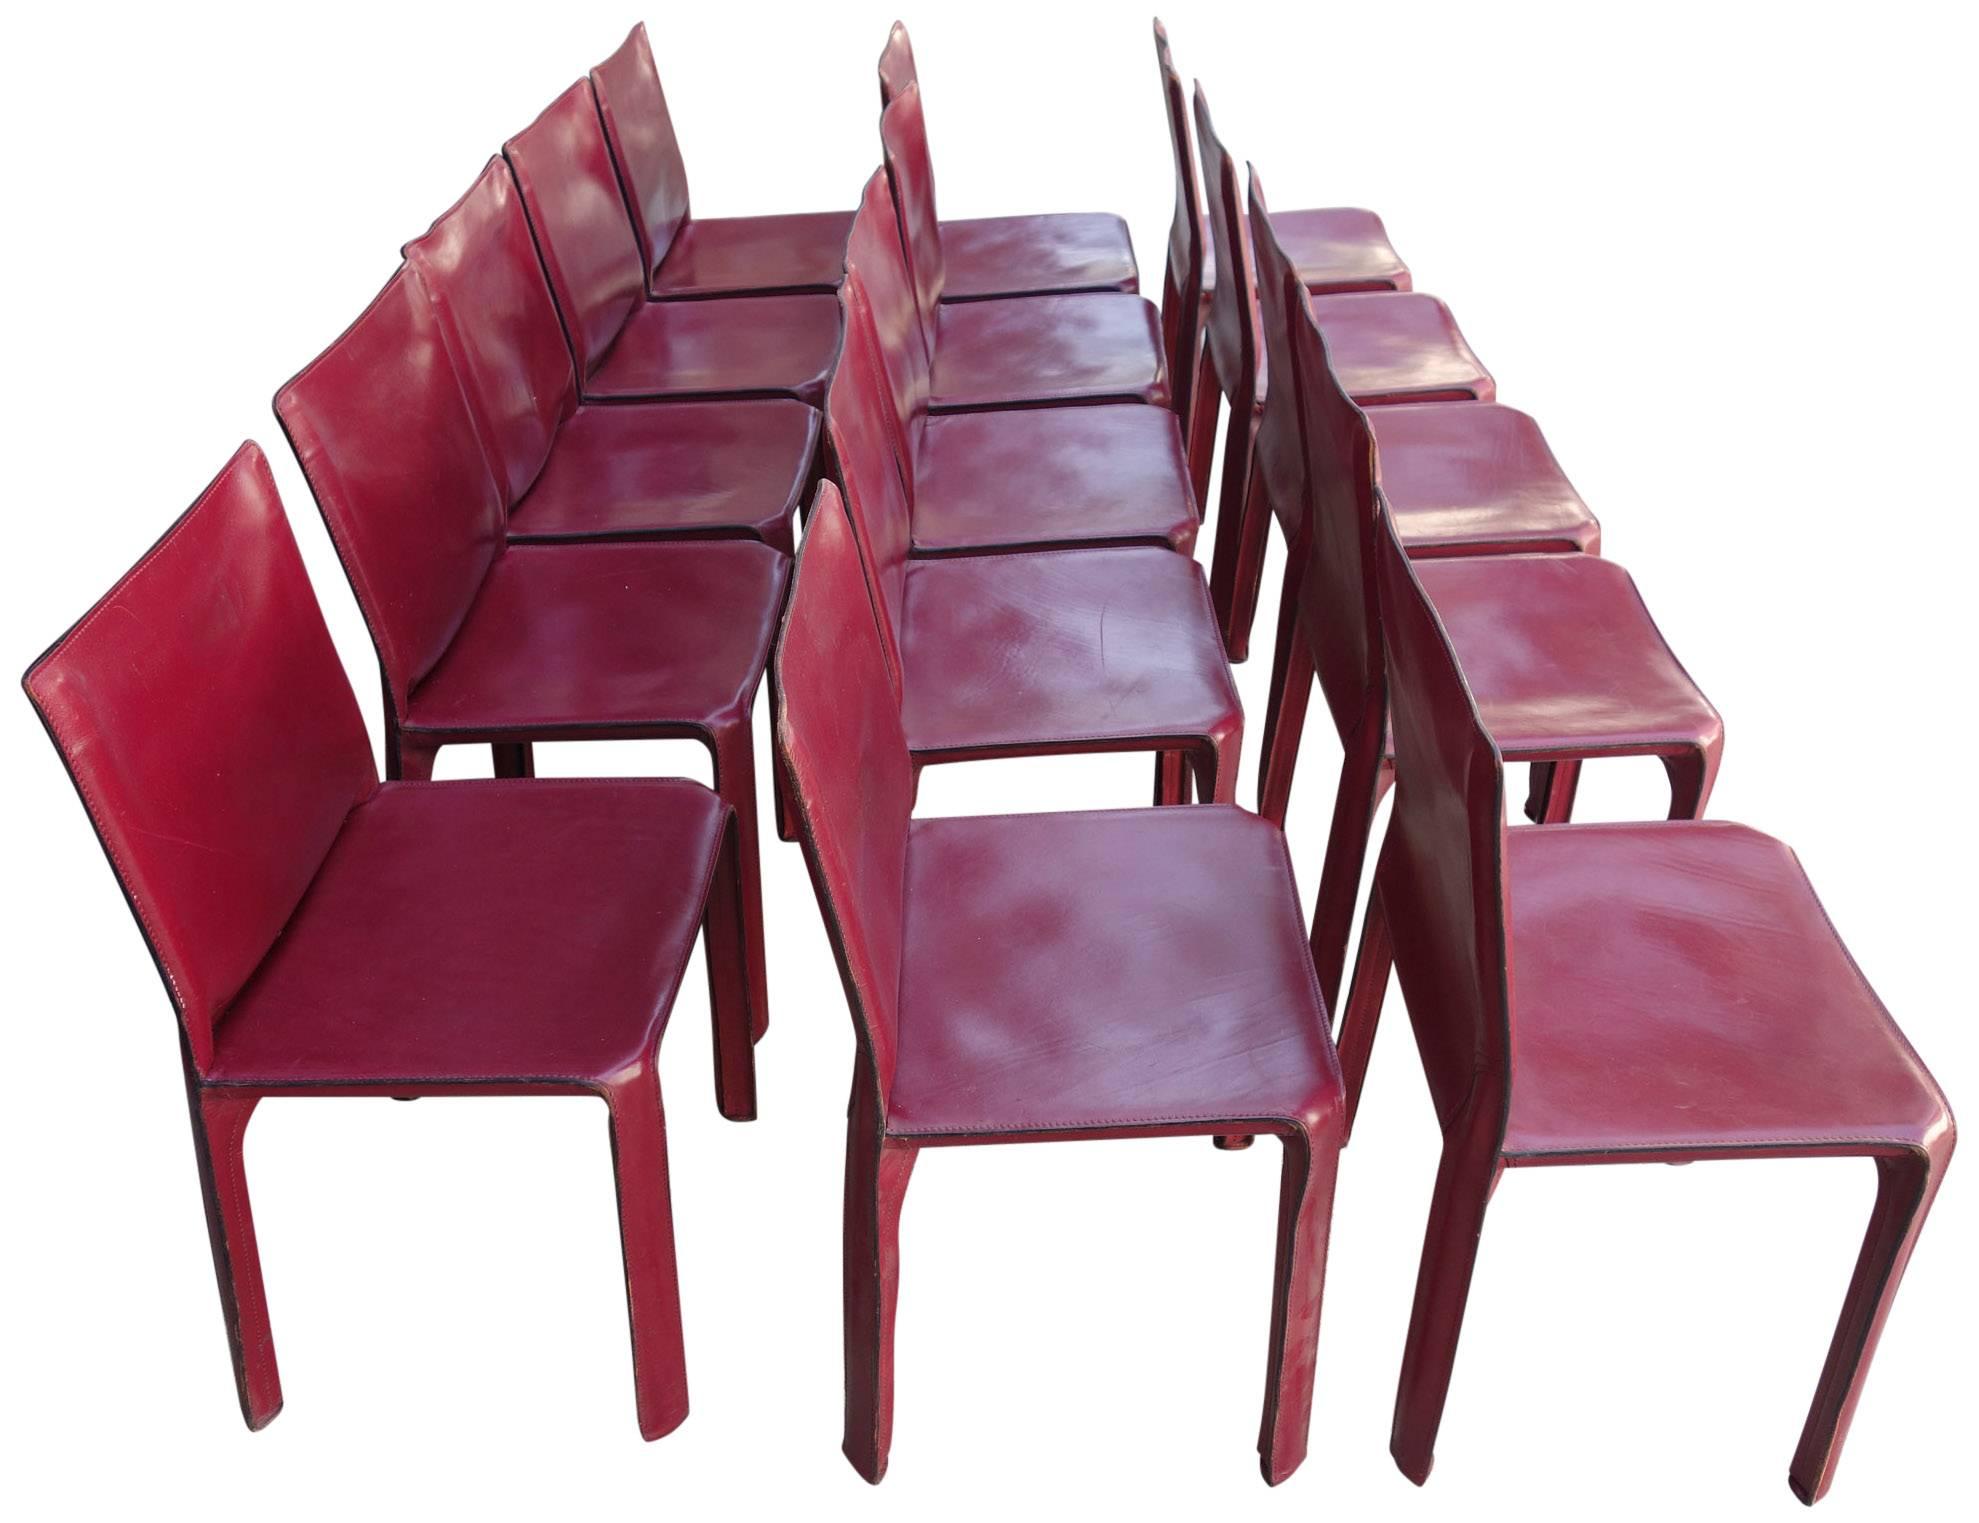 Wonderful set of 15 midcentury CAB dining chairs in red saddle leather wrapped around a steel frame. All display constant age appropriate wear and patina. This design is part of the permanent collection at the MoMA.

Model 412.